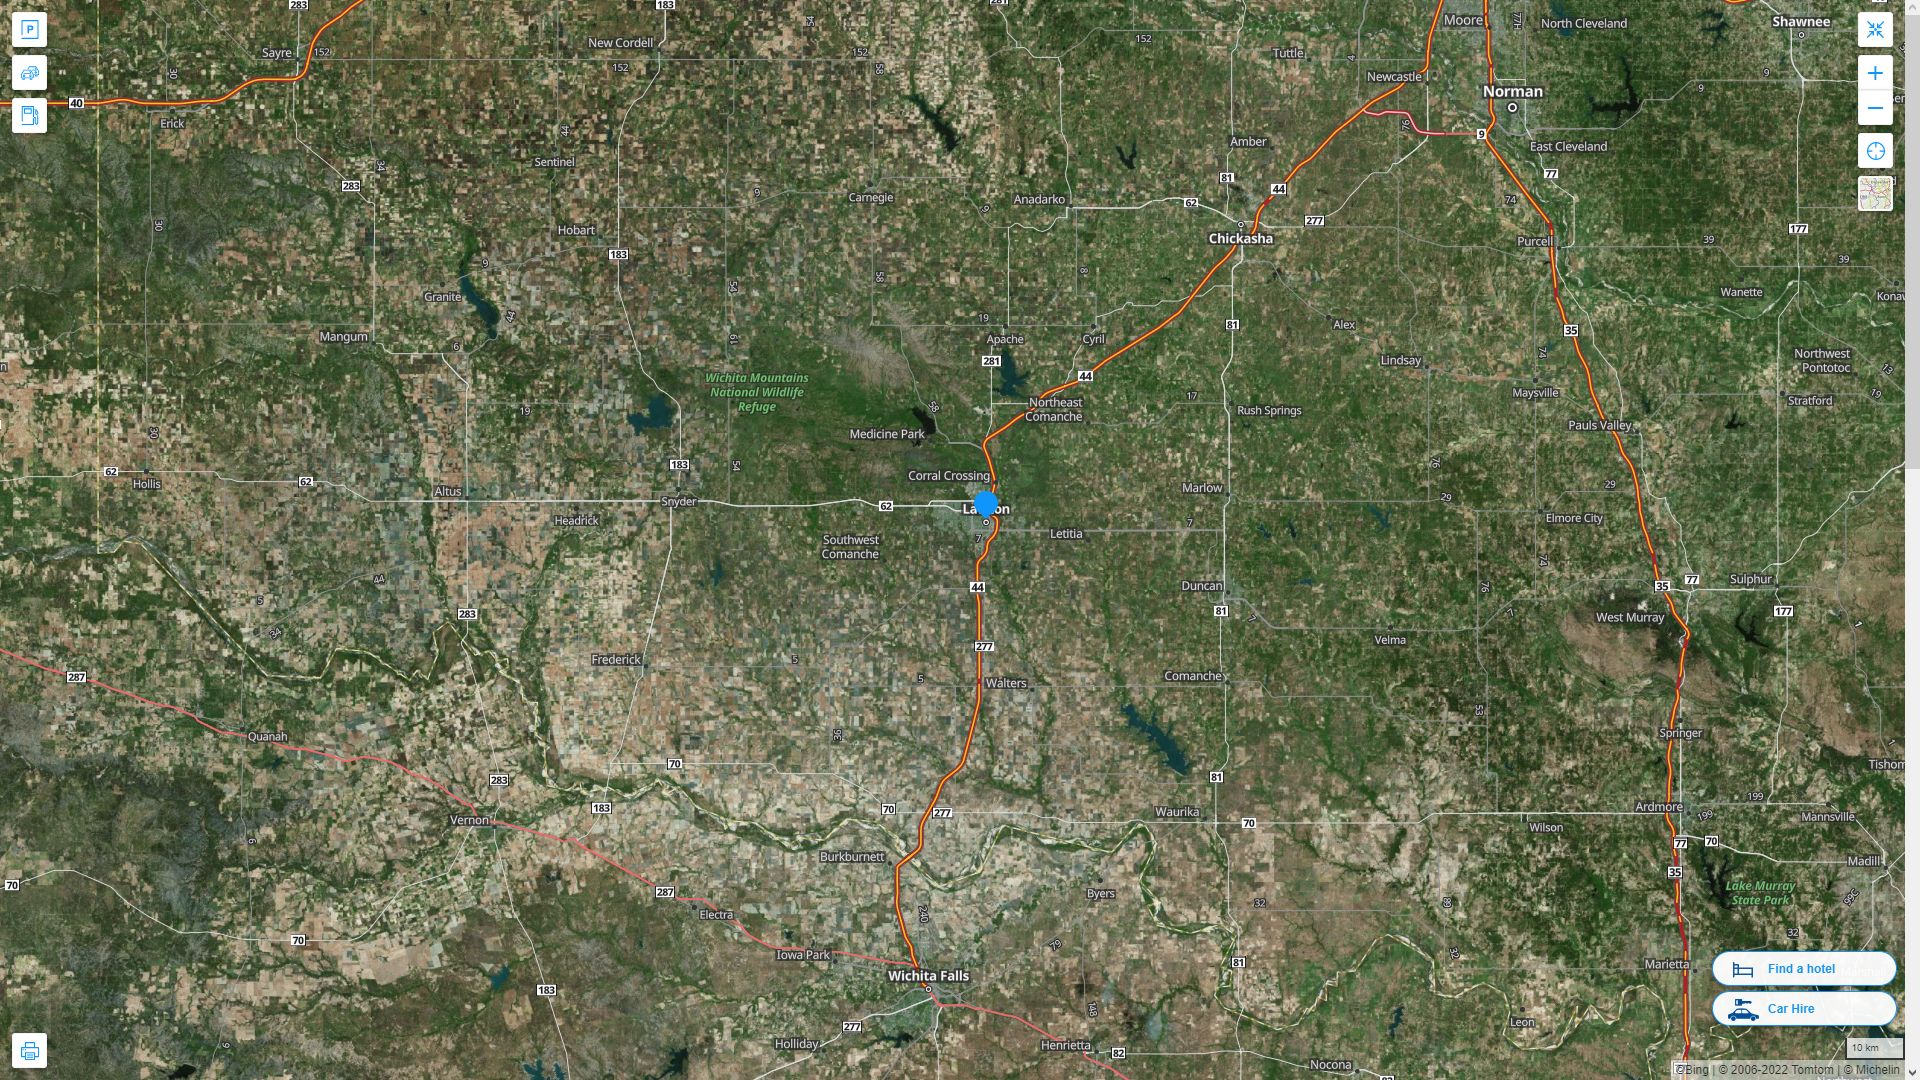 Lawton Oklahoma Highway and Road Map with Satellite View